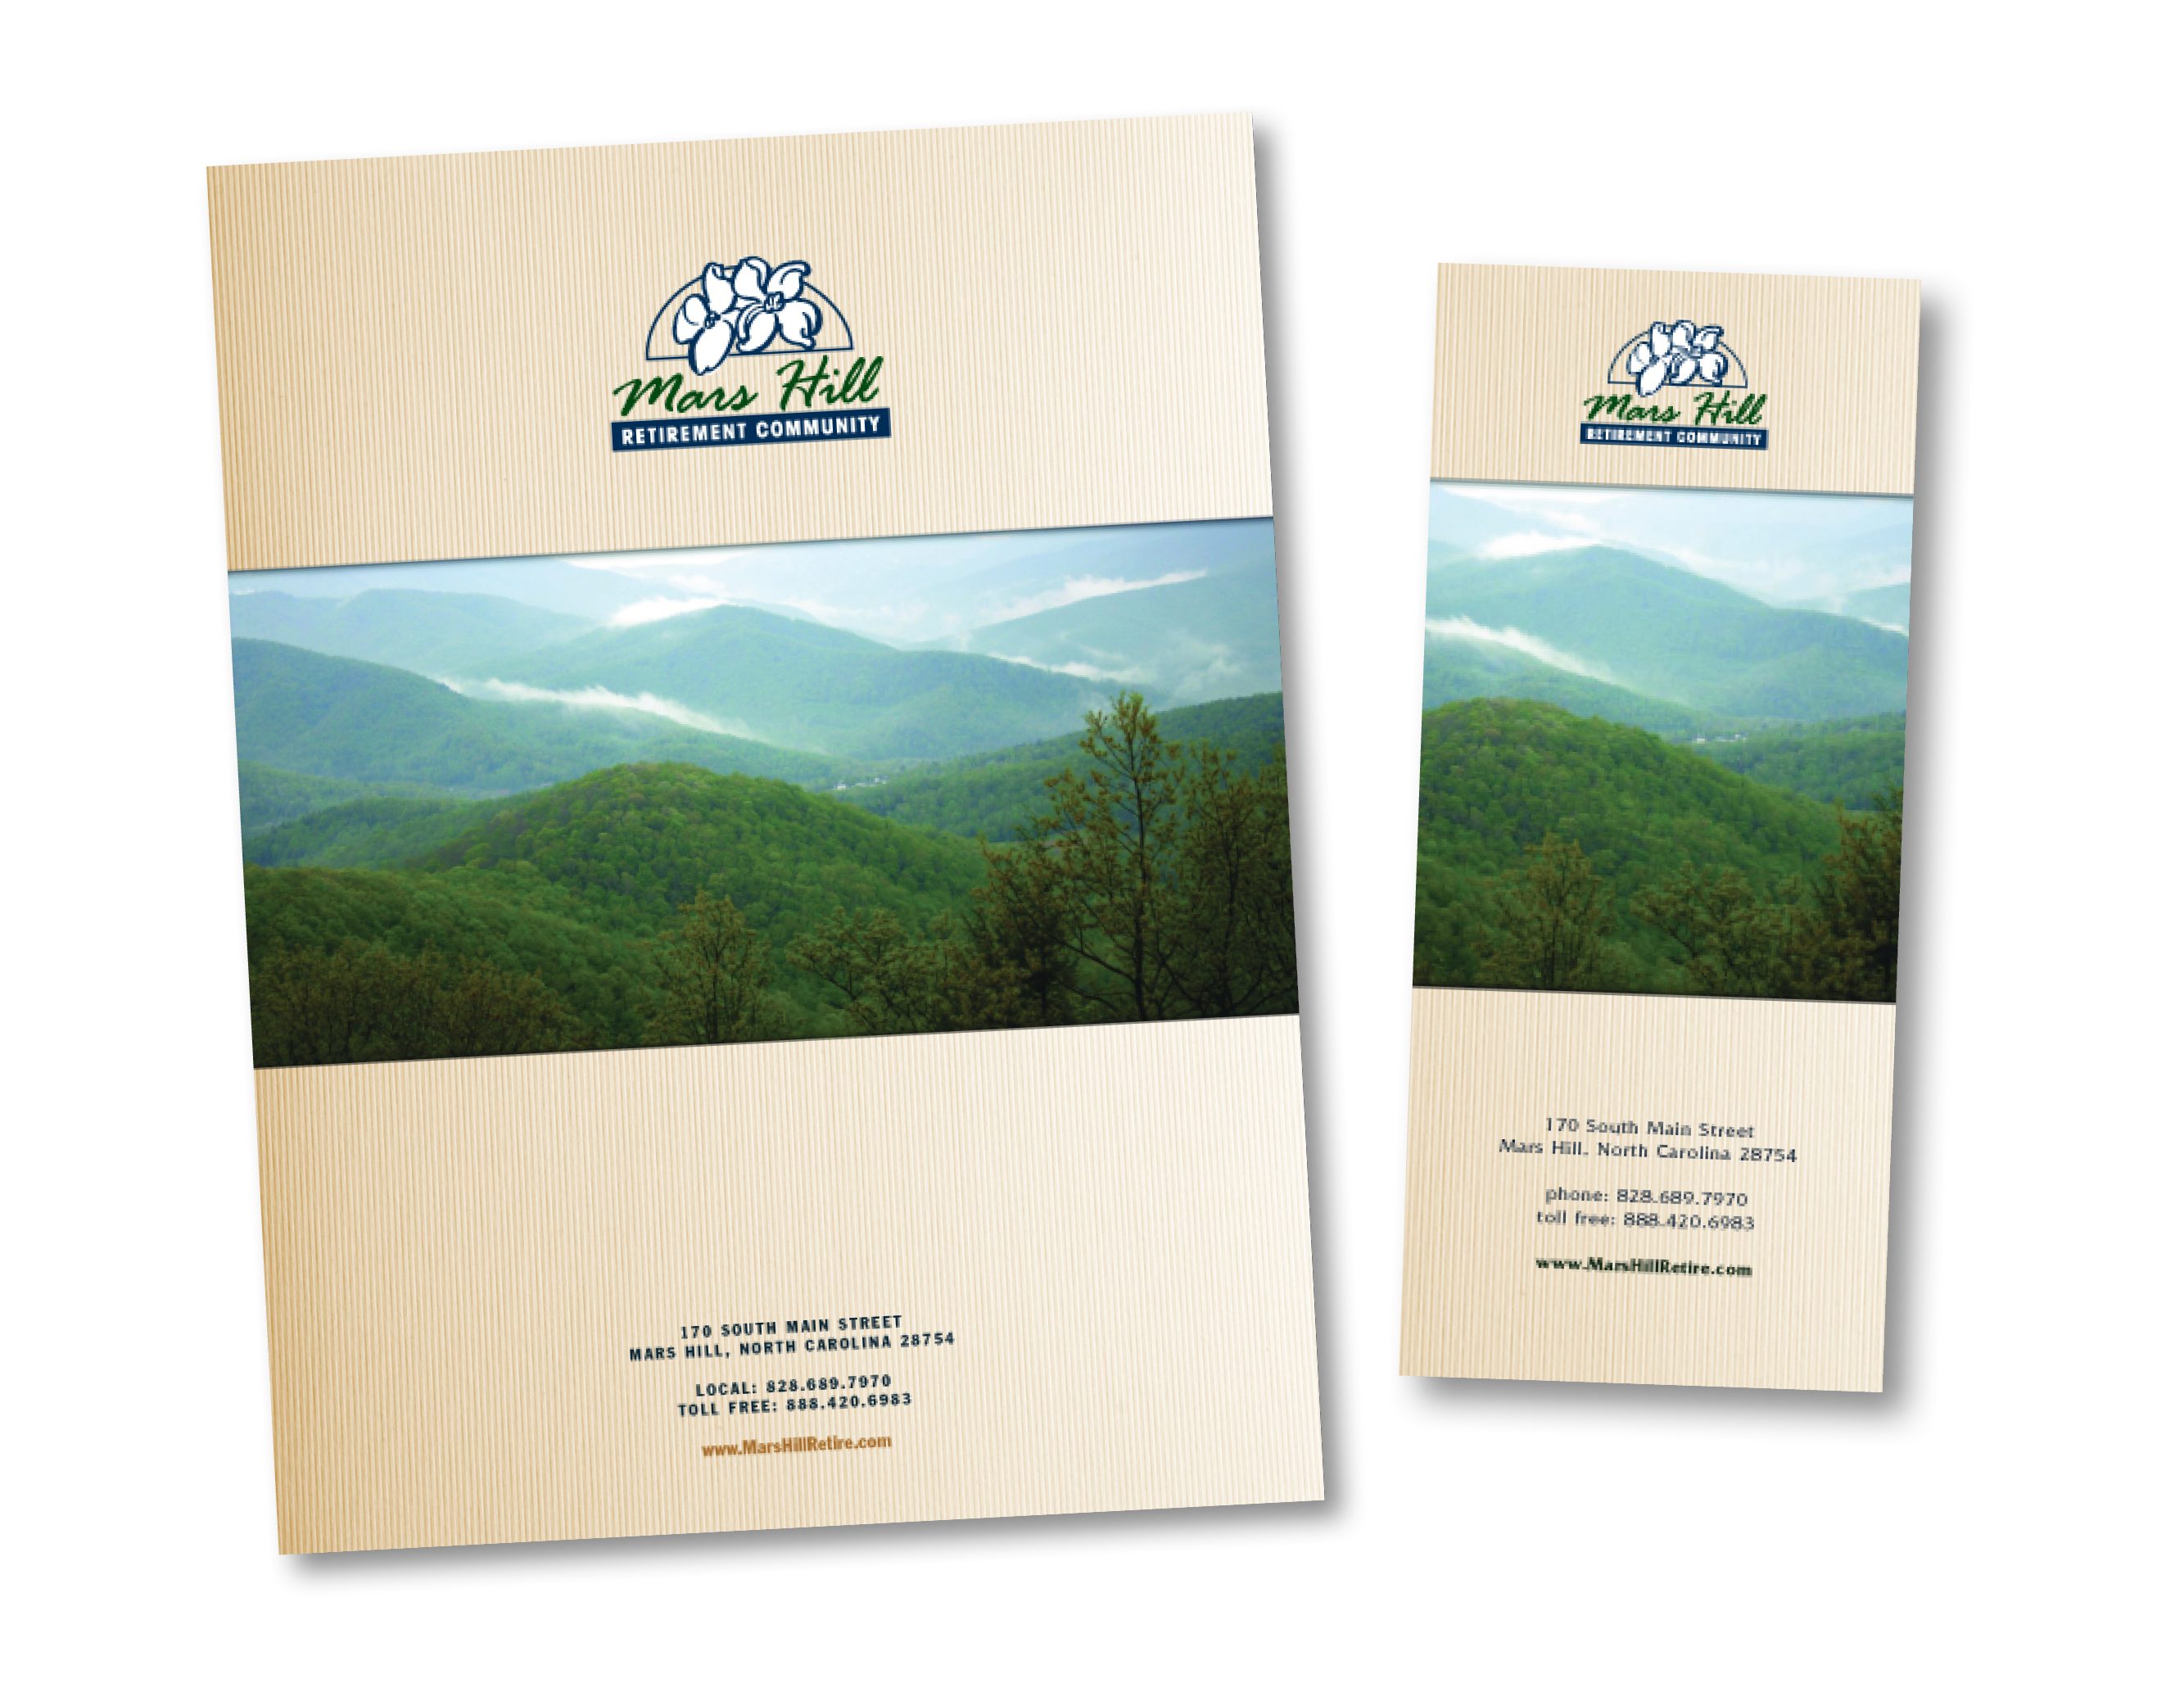 Raleigh Graphic Design Firm Sample Signage pocket folder and Brochure for retirement community